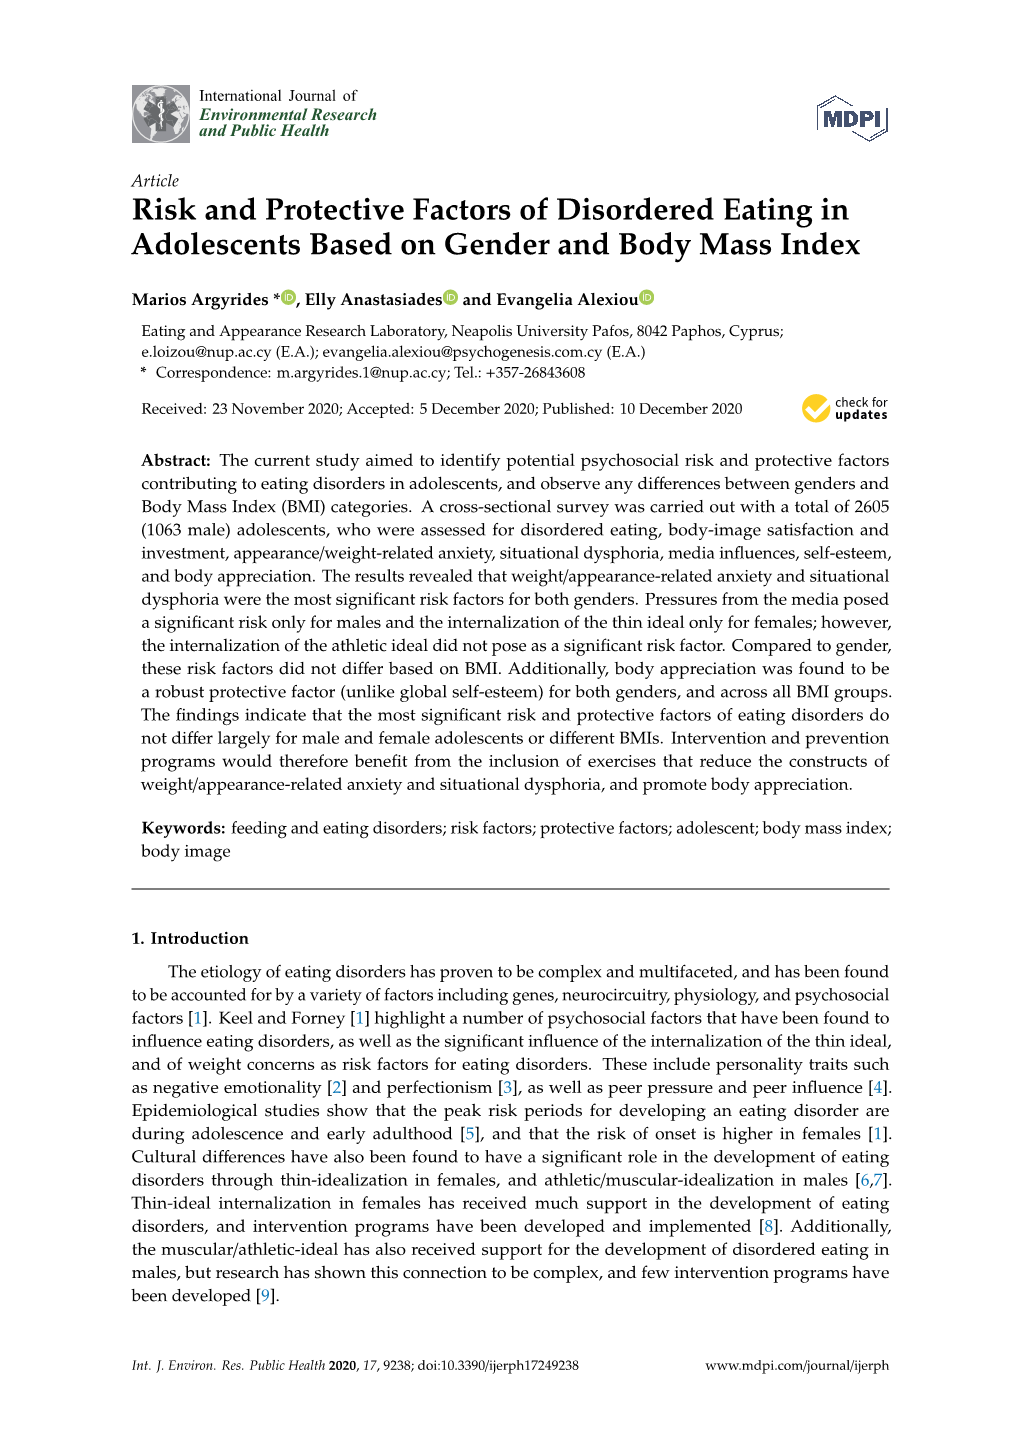 Risk and Protective Factors of Disordered Eating in Adolescents Based on Gender and Body Mass Index